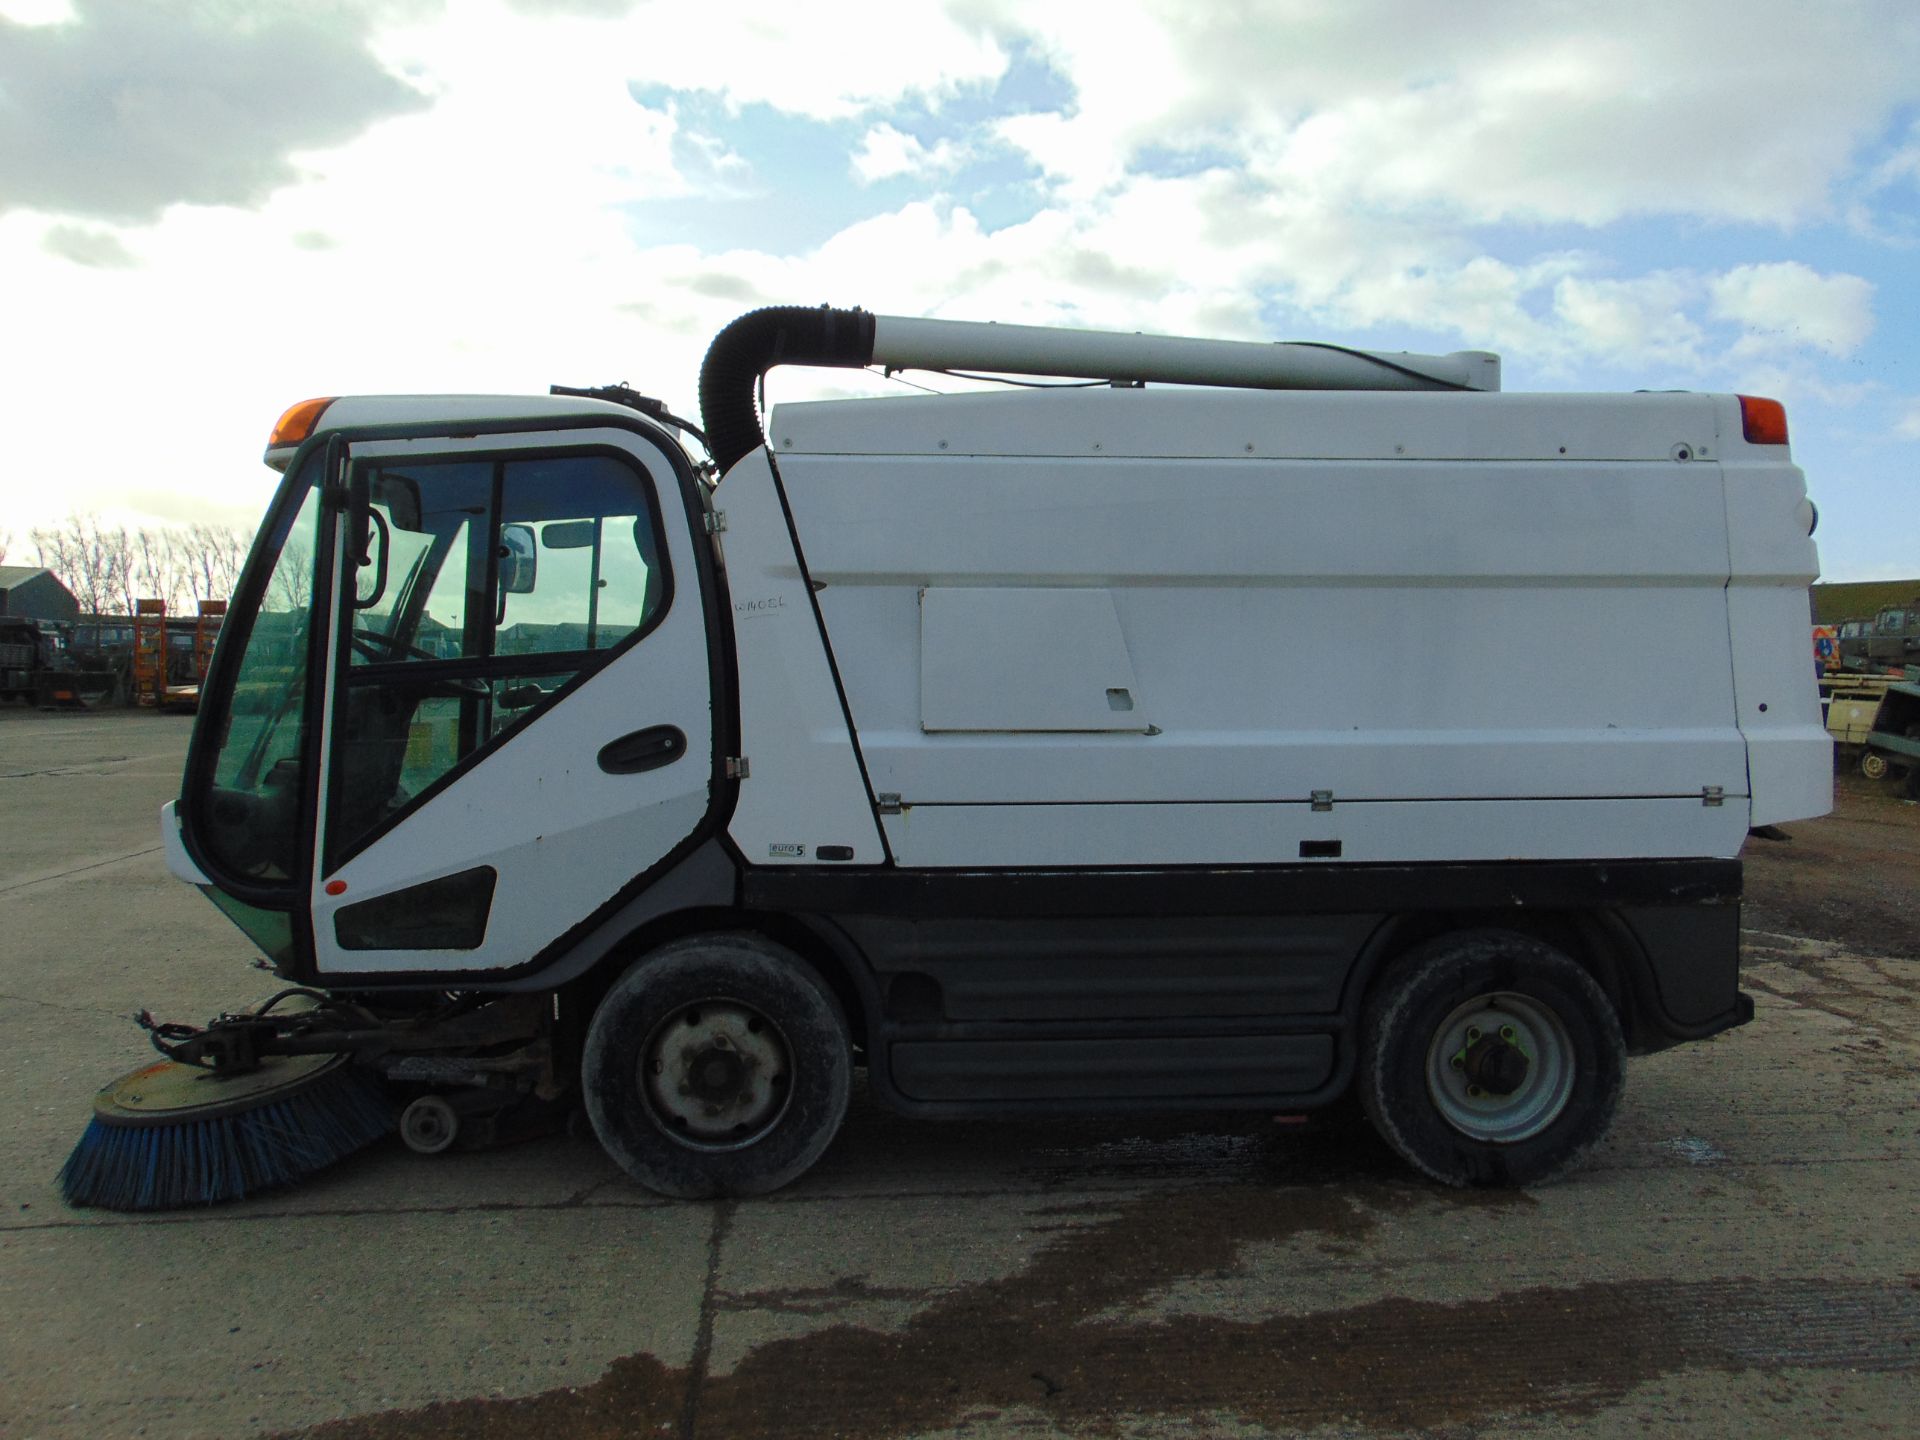 2015 Johnston CX400 EURO 5 Road Sweeper - Image 2 of 22